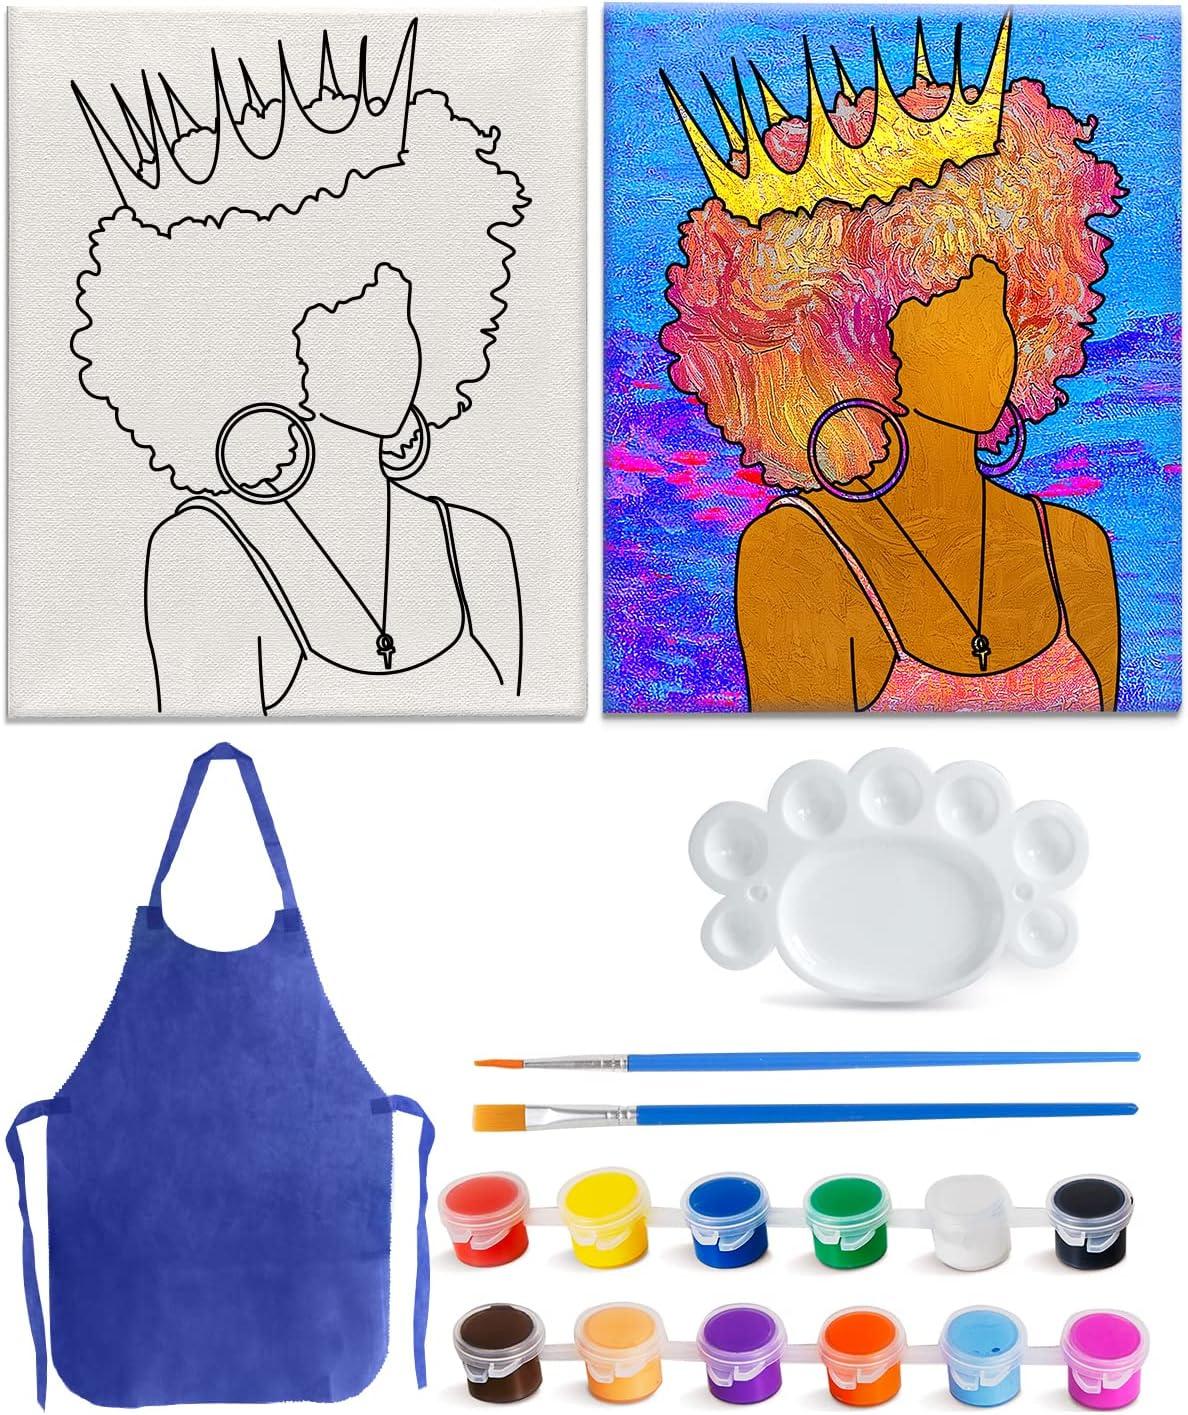 4 PACK 8x10 AFRO QUEEN PAINT PARTY KIT 2 With Paint | Pre Drawn Stretched  Canvas Kit | Birthday Gift | Adult Sip and BLM Party Favor | DIY Virtual